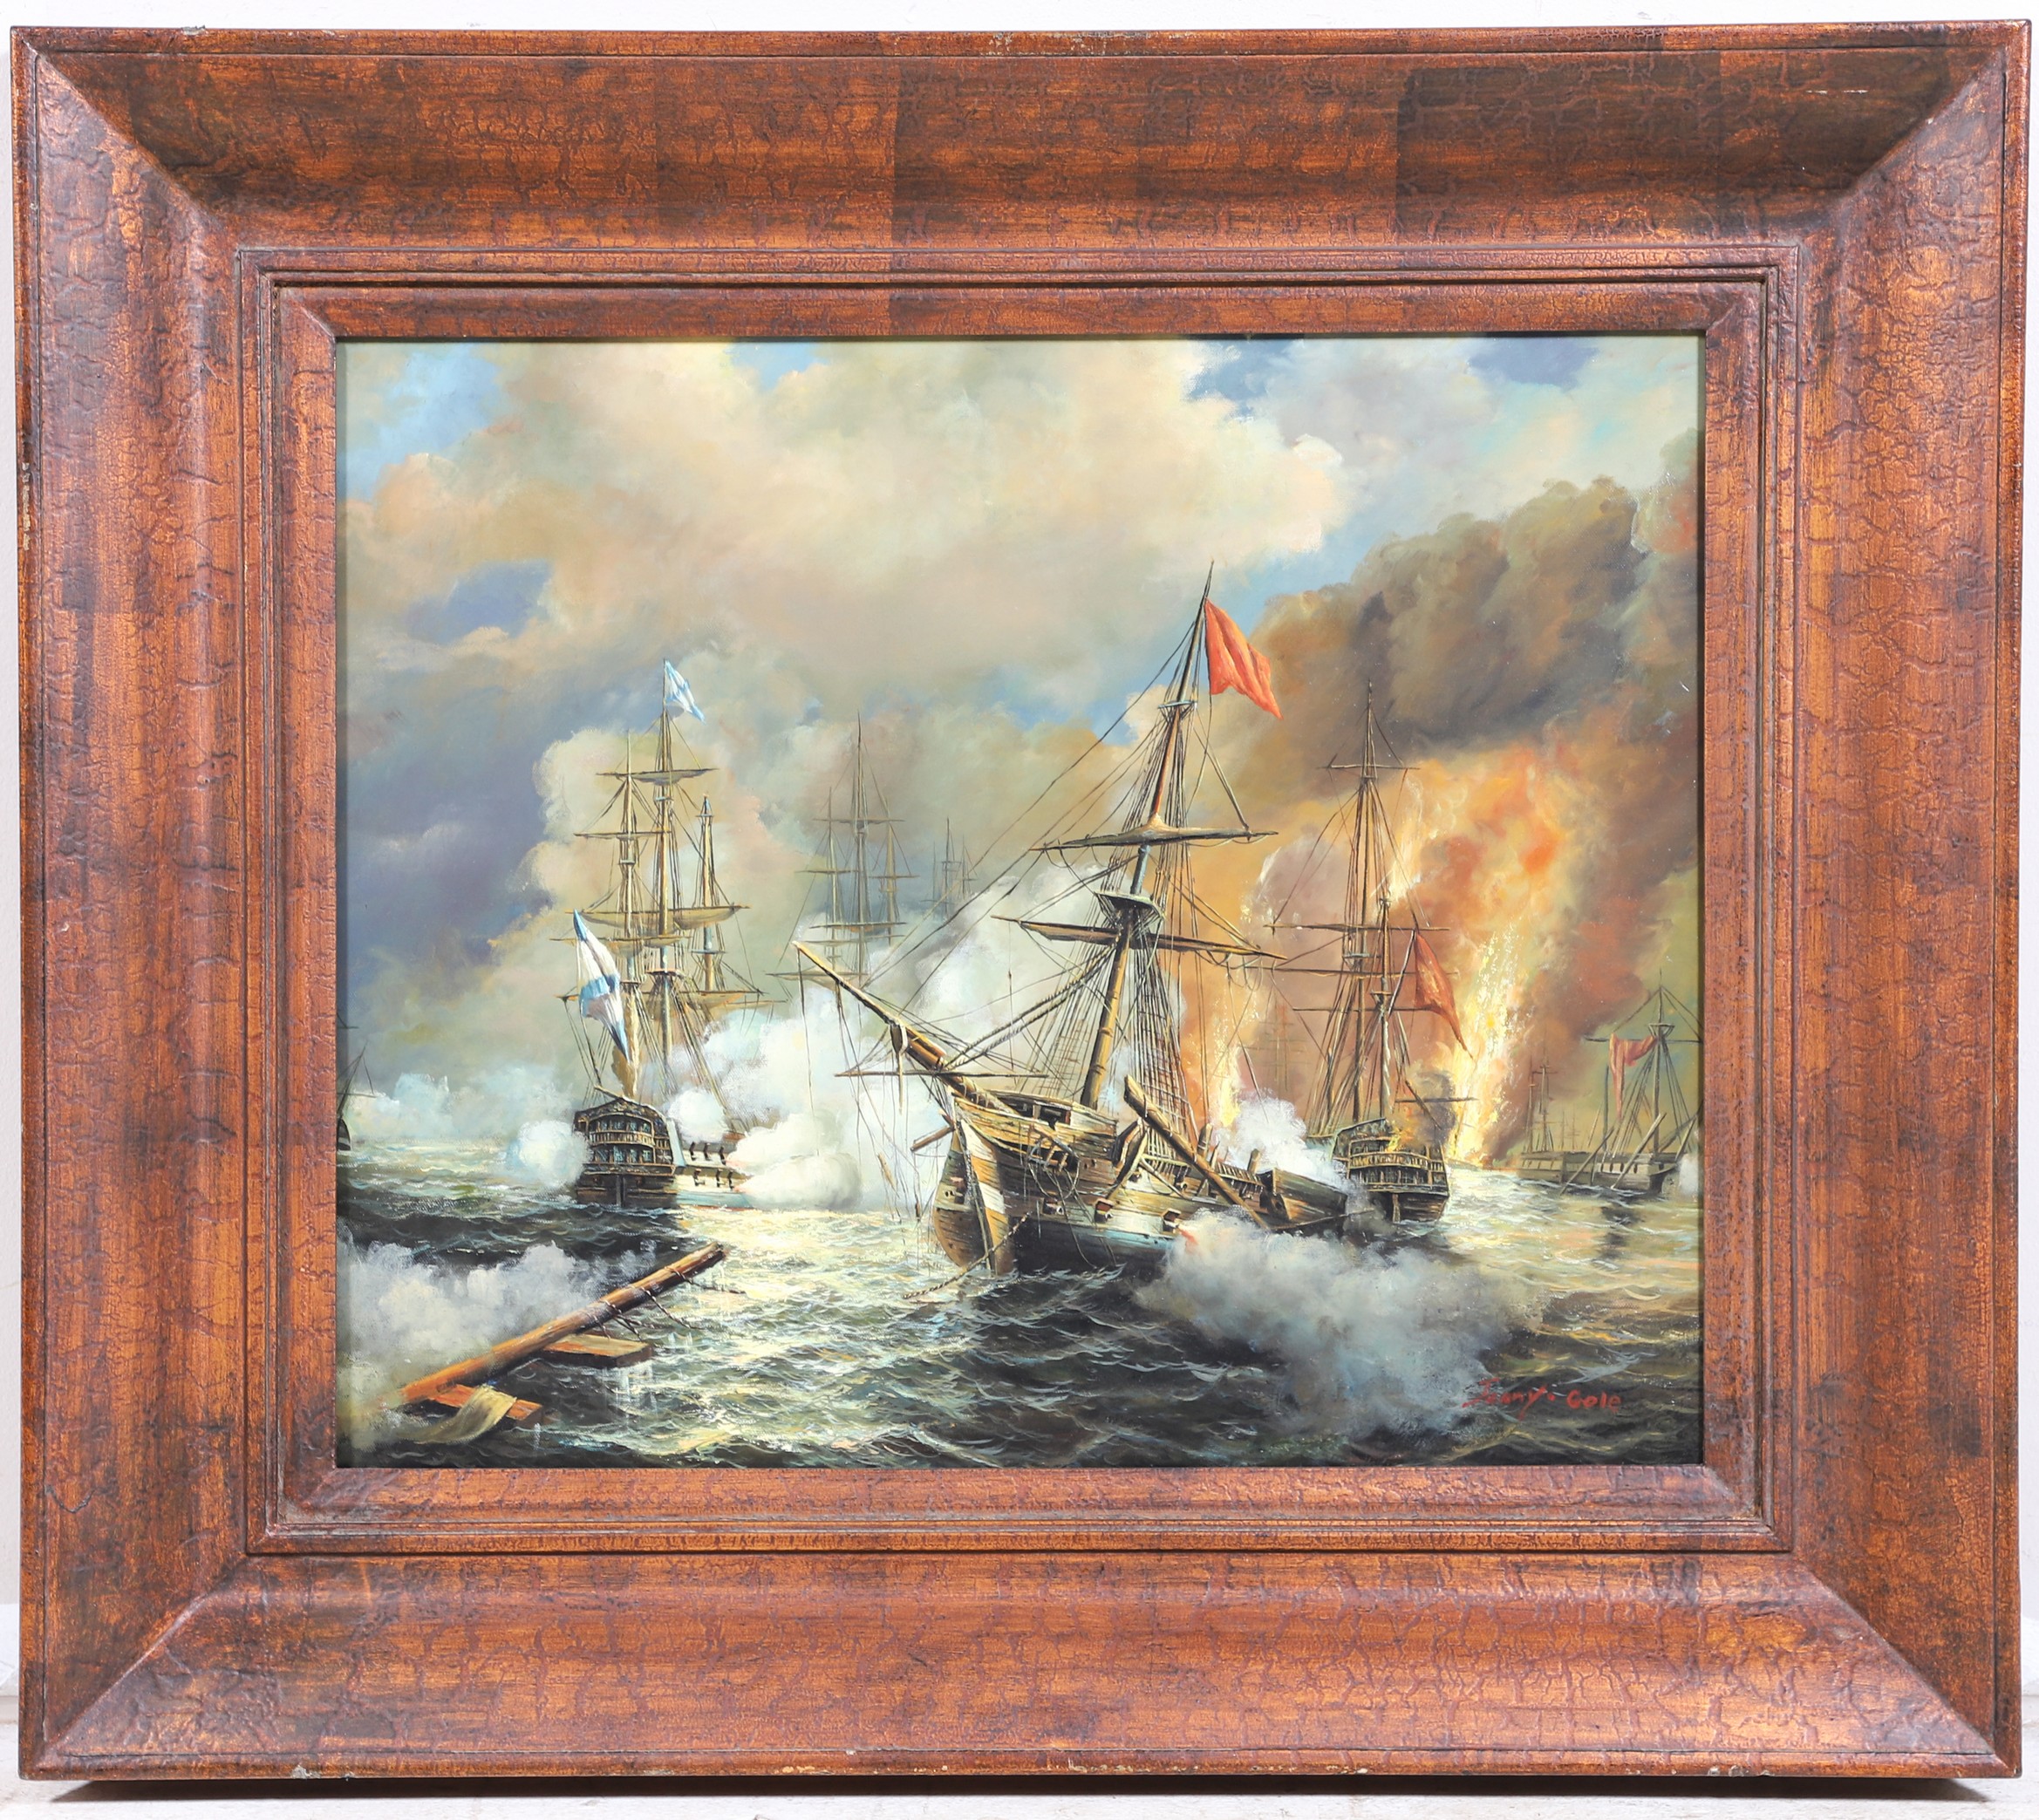 Reproduction Painting of a Sea 2781f8